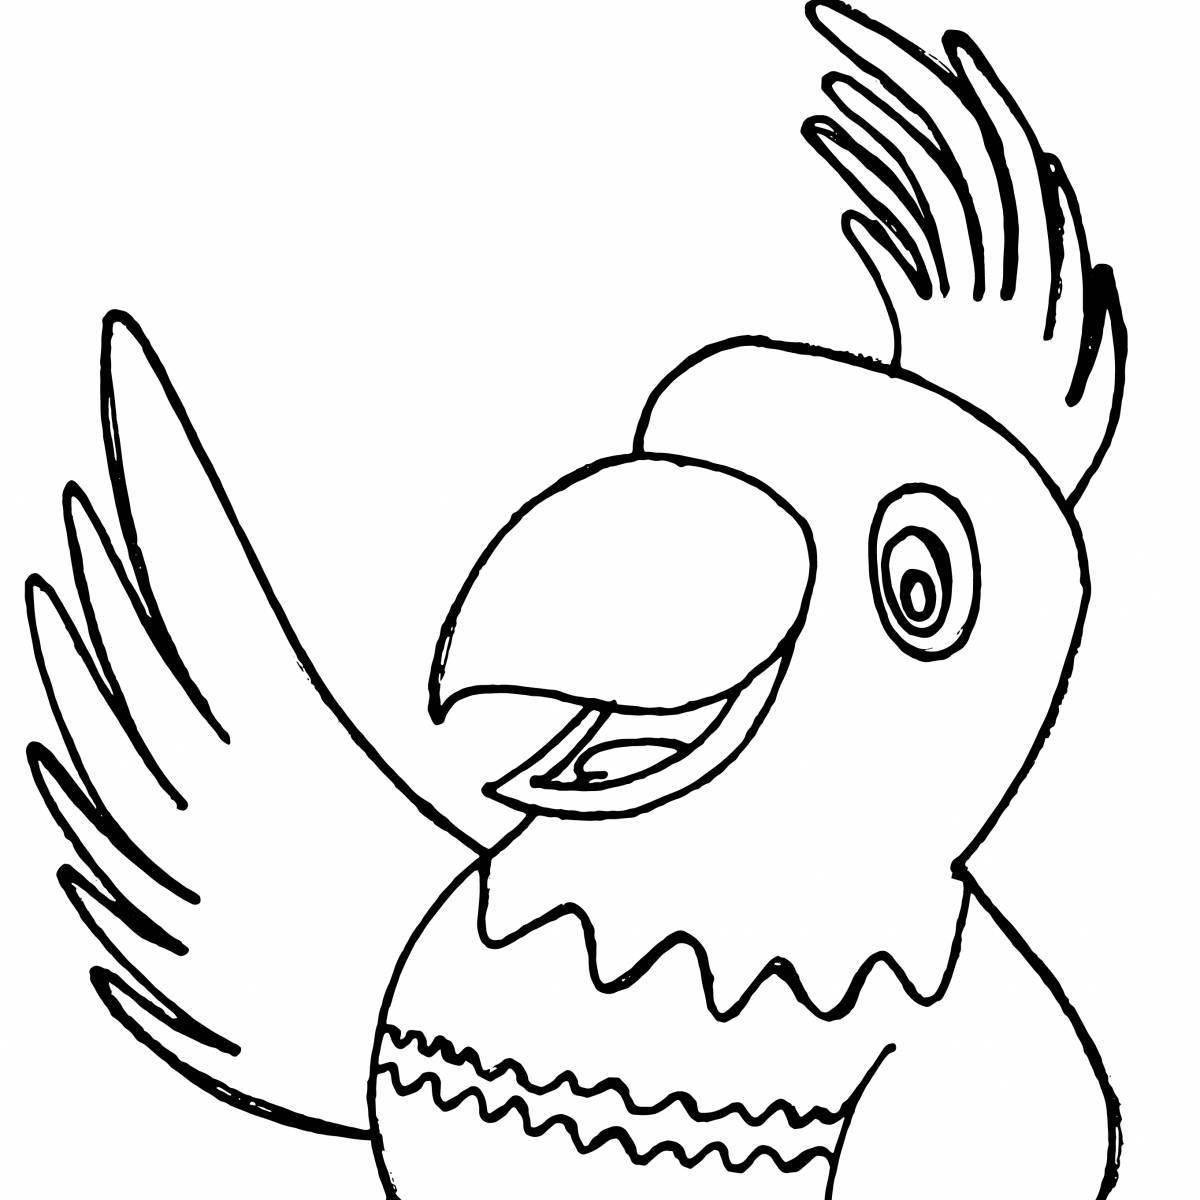 Adorable parrot coloring page for 3-4 year olds